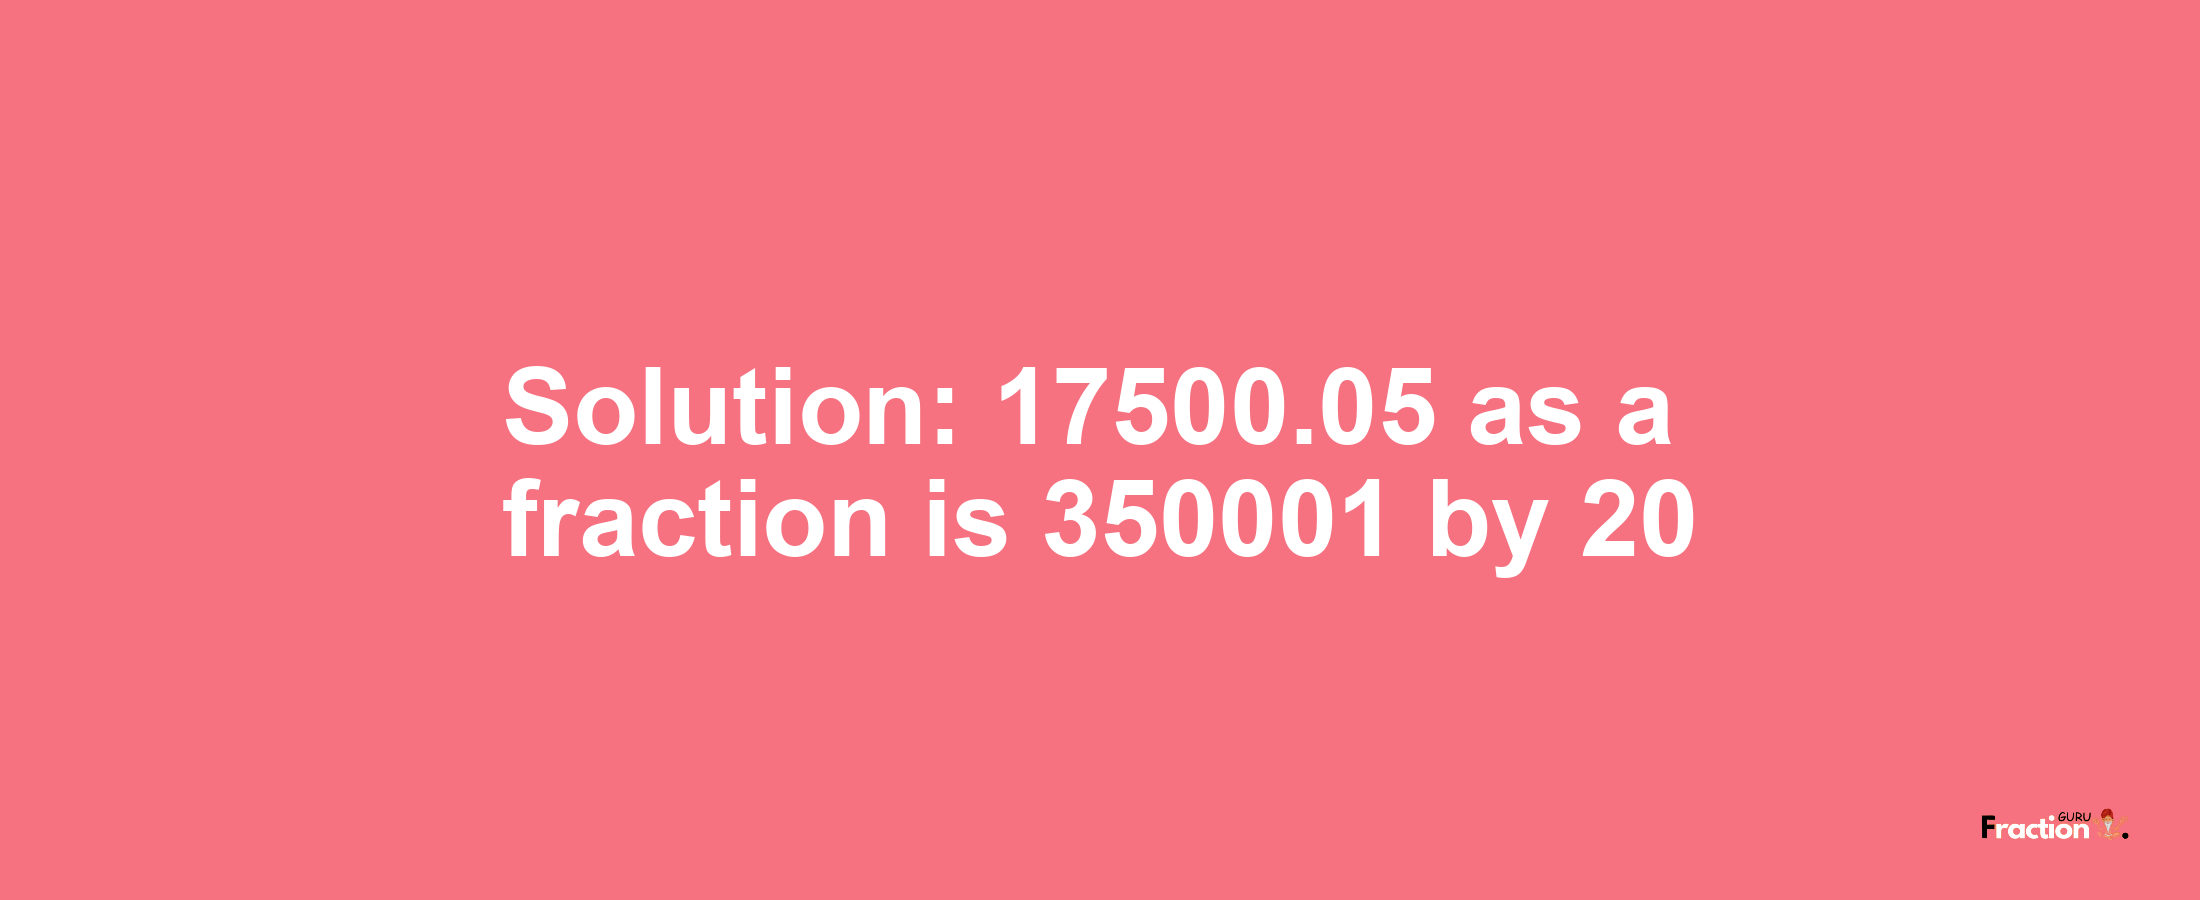 Solution:17500.05 as a fraction is 350001/20